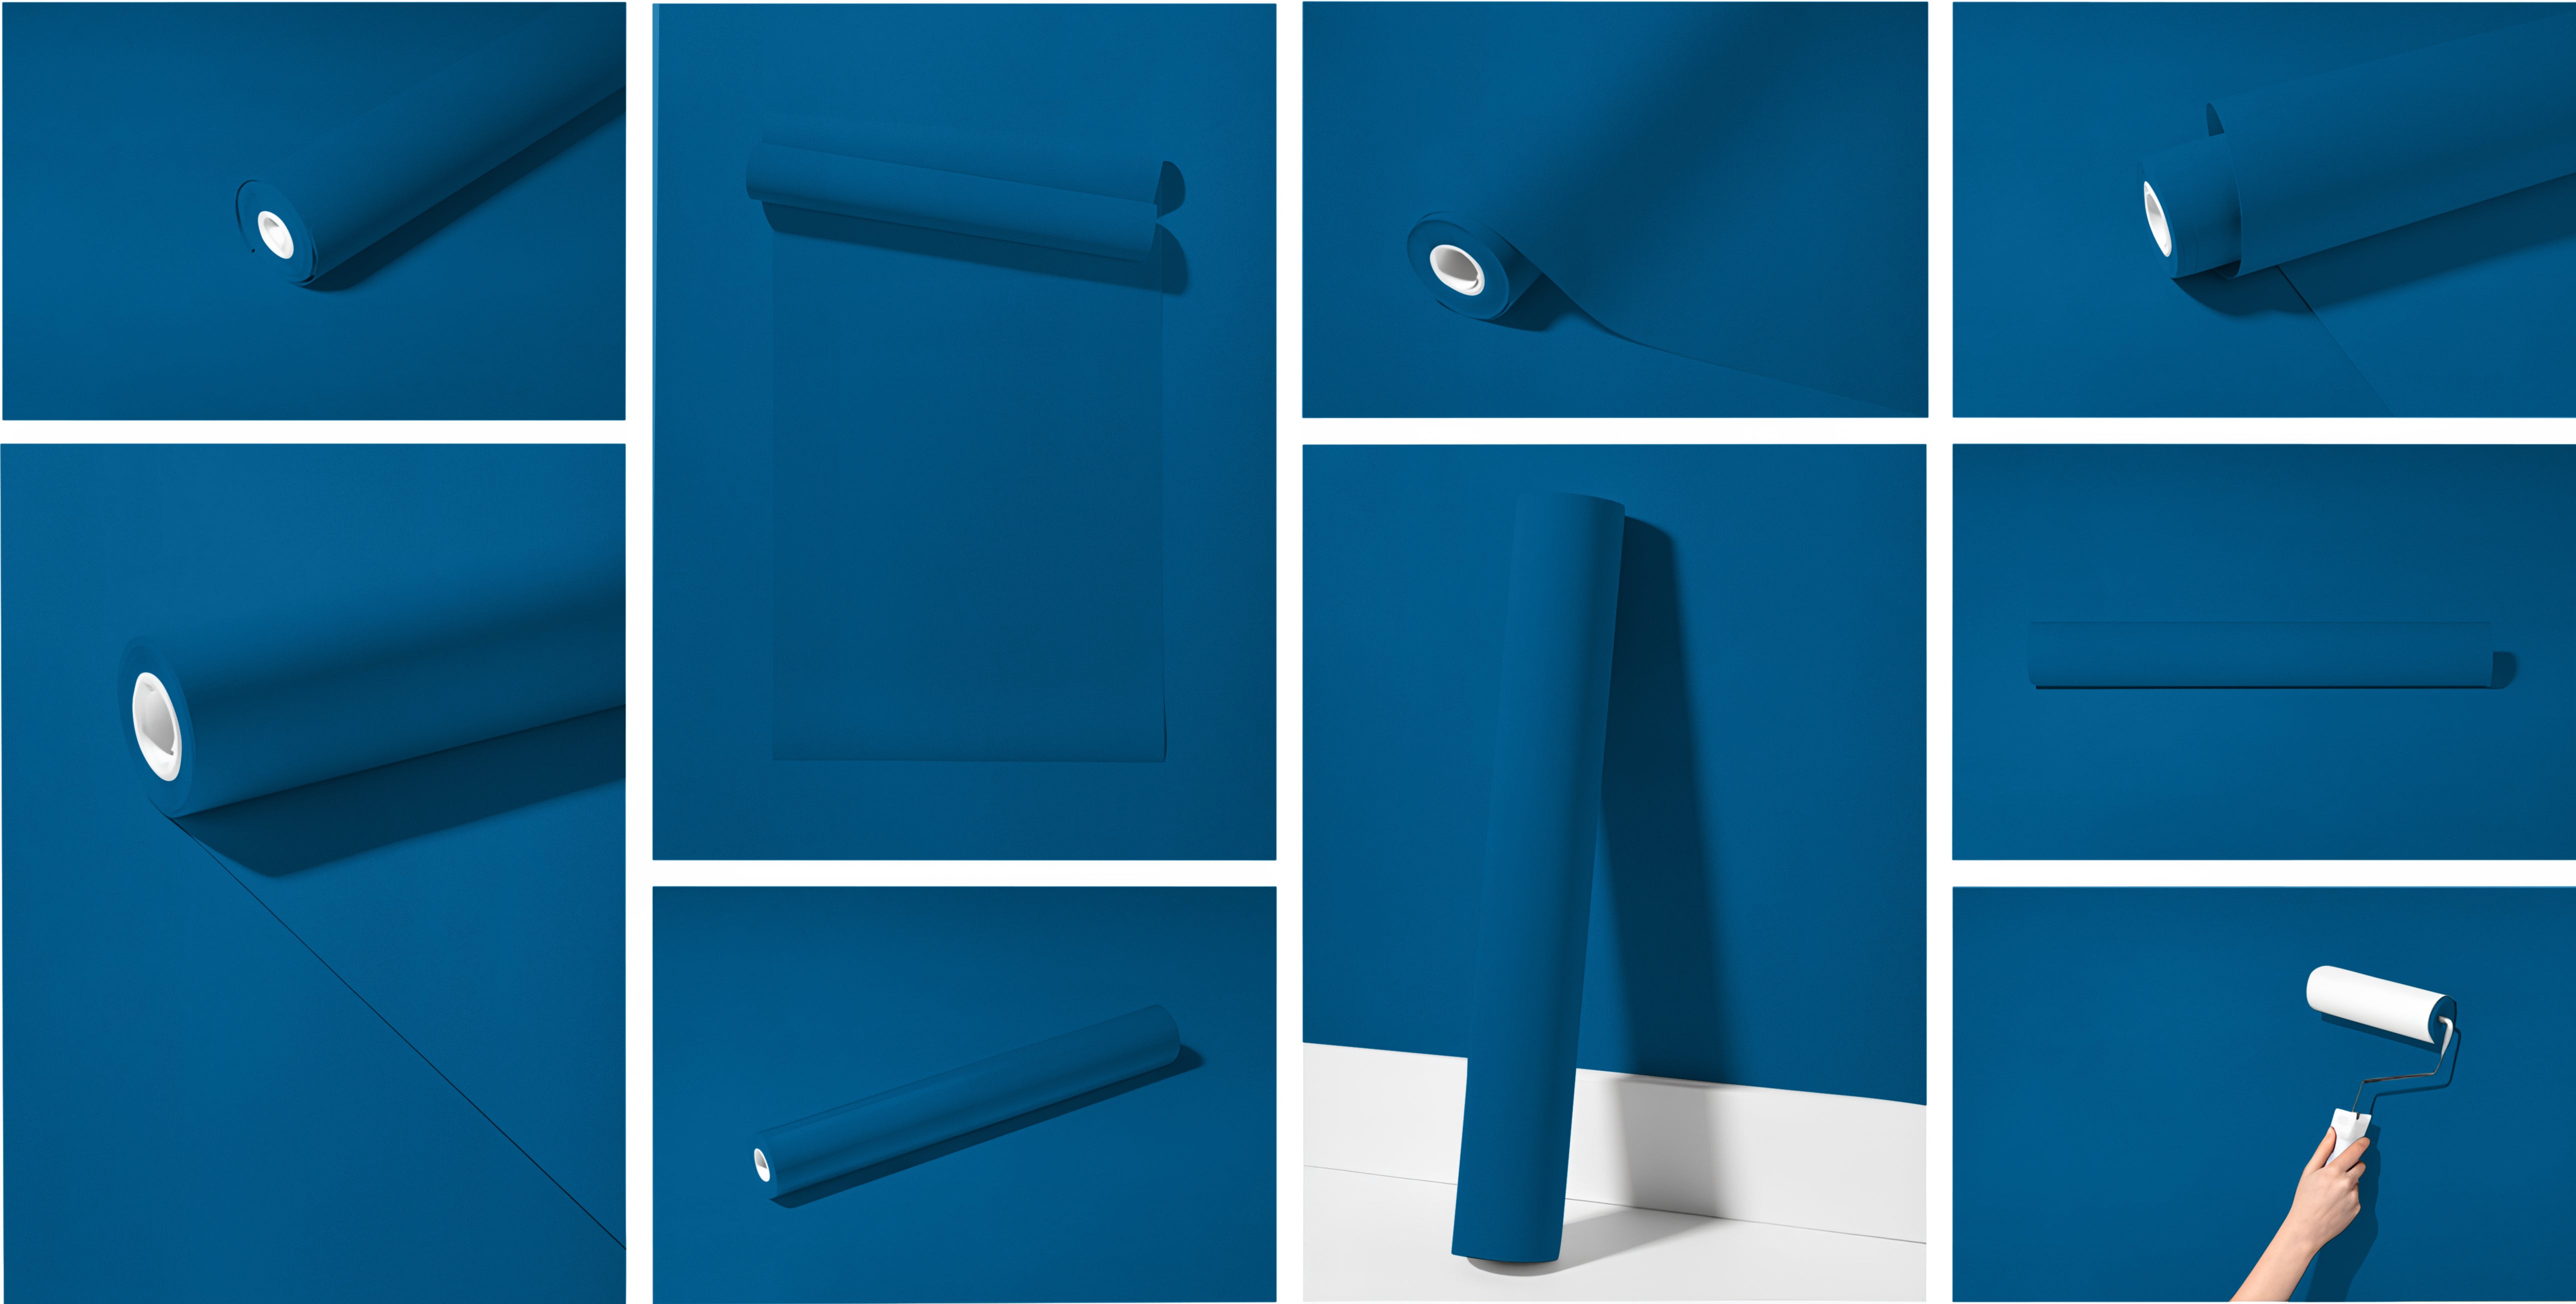 Peel & Stick Removable Re-usable Paint - Color RAL 5017 Traffic Blue - offRAL™ - RALRAW LLC, USA